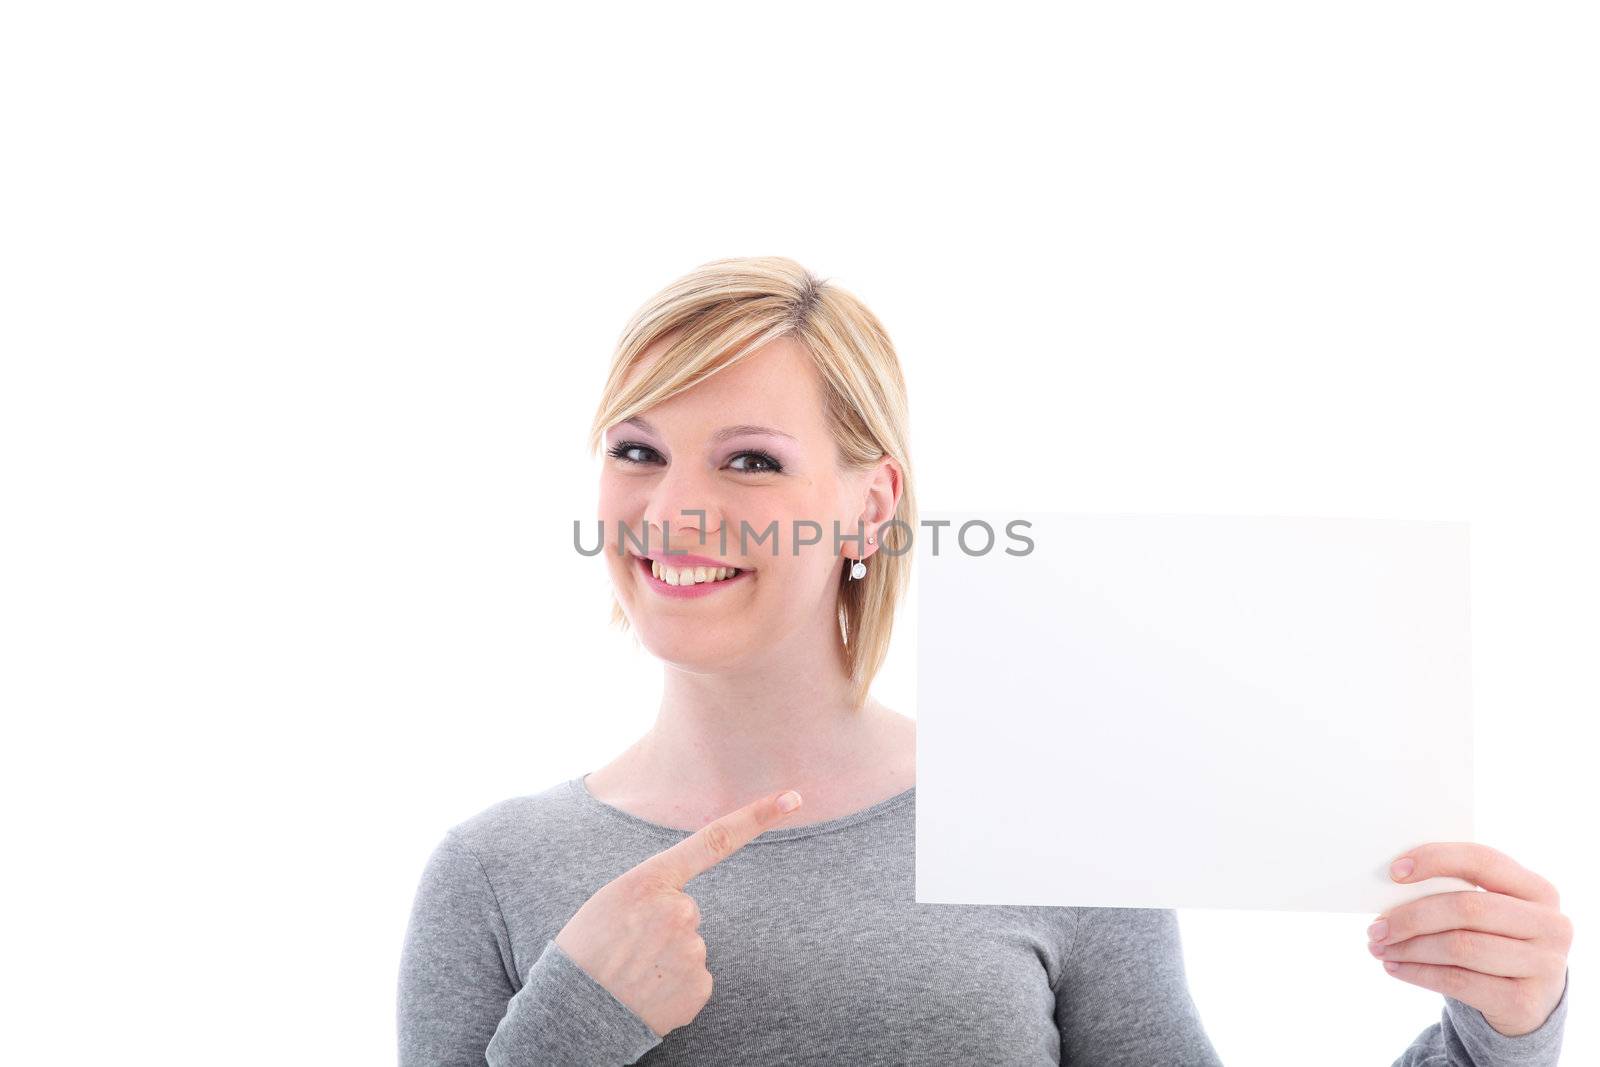 Smiling woman pointing with her finger to a blank sign that she is holding up to the side of her face isolated on white 